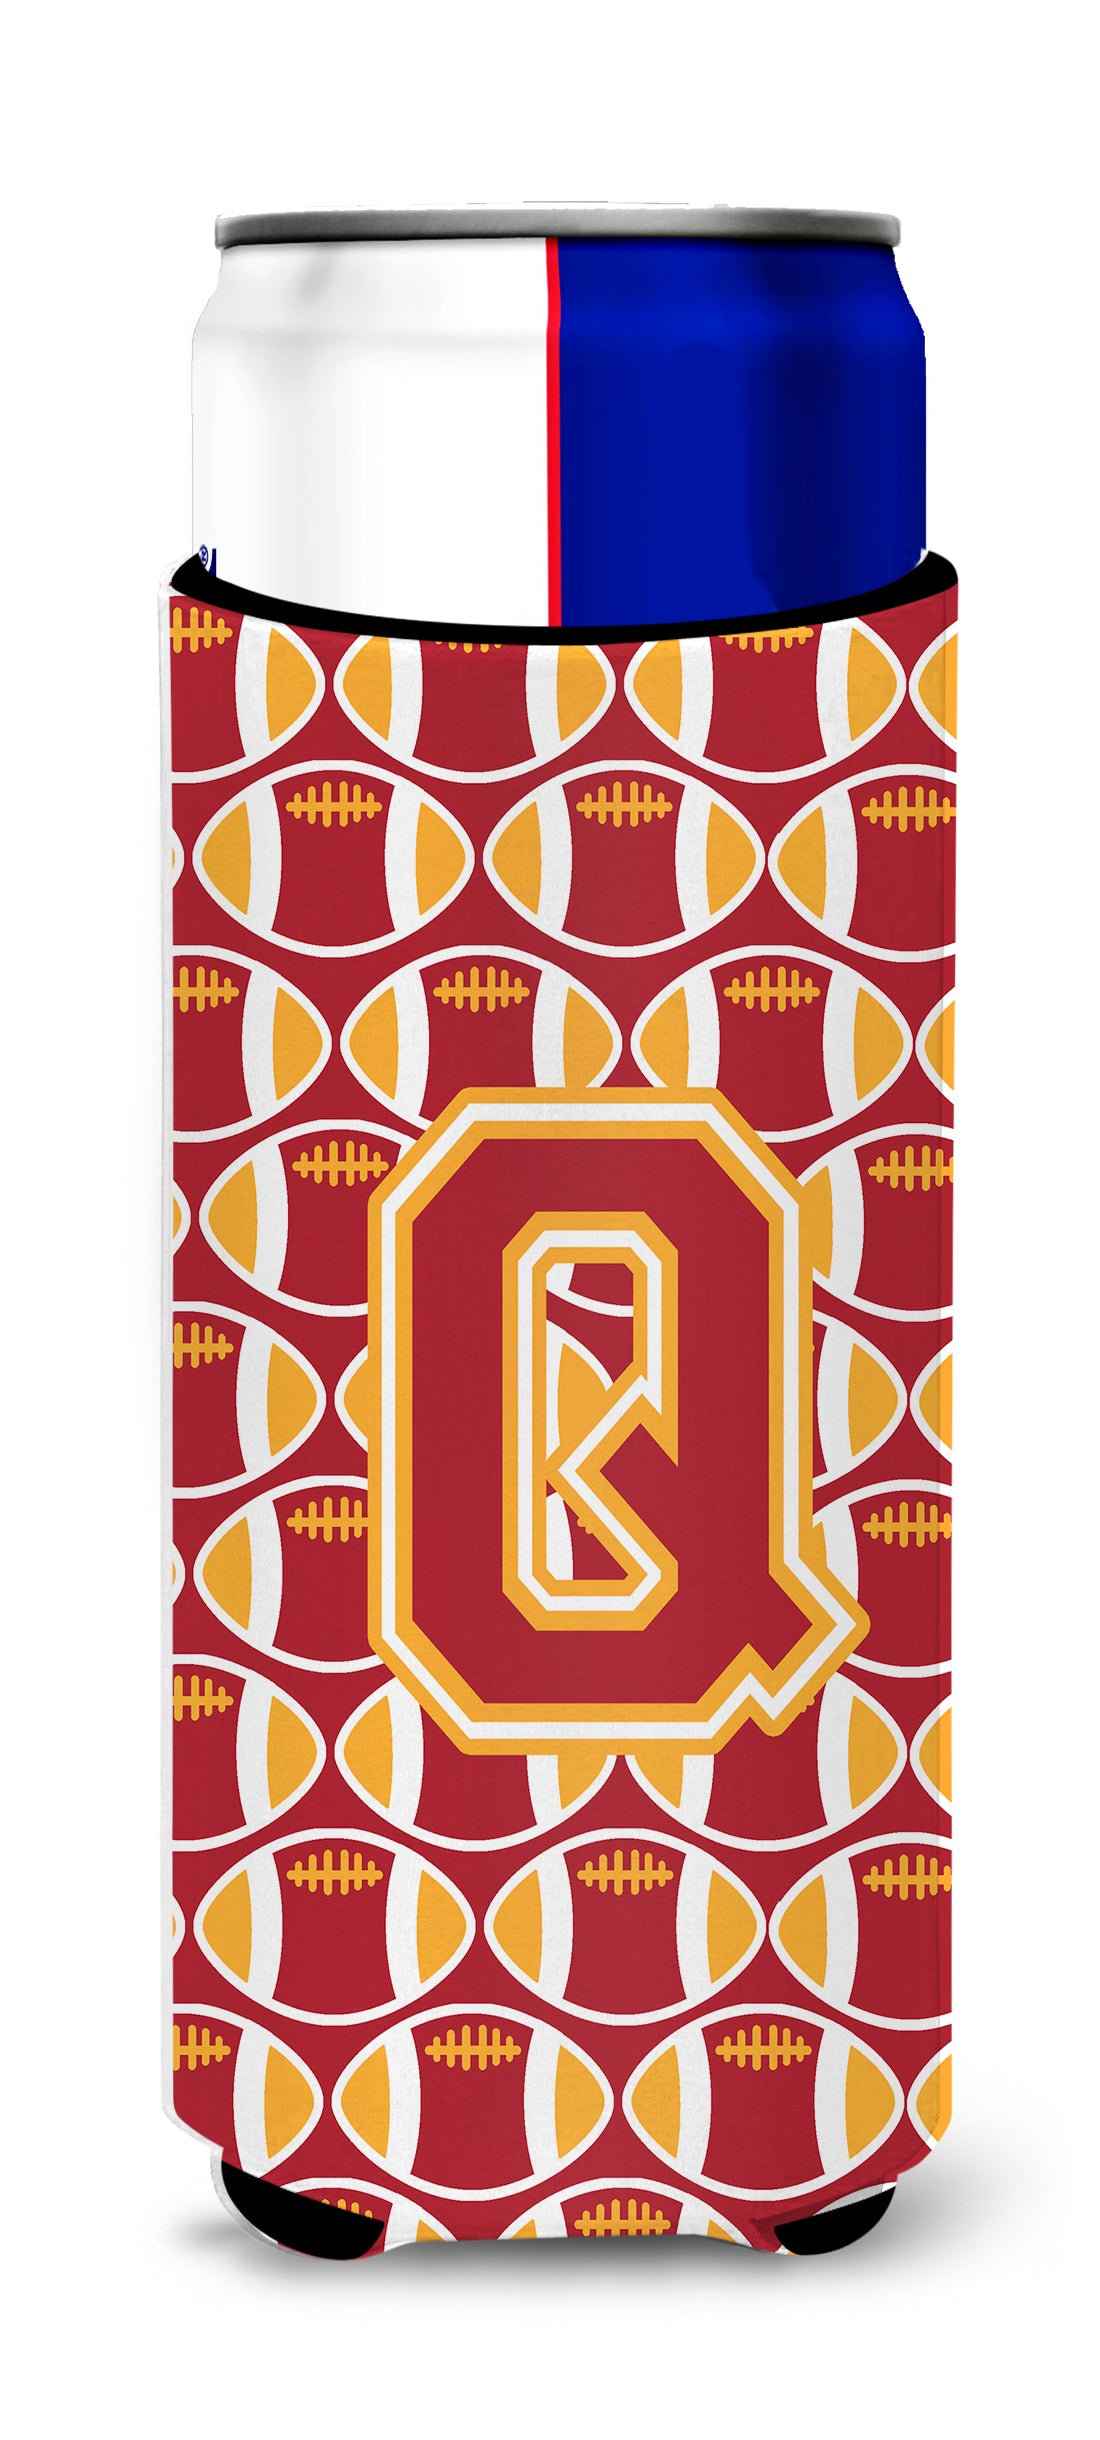 Letter Q Football Cardinal and Gold Ultra Beverage Insulators for slim cans CJ1070-QMUK